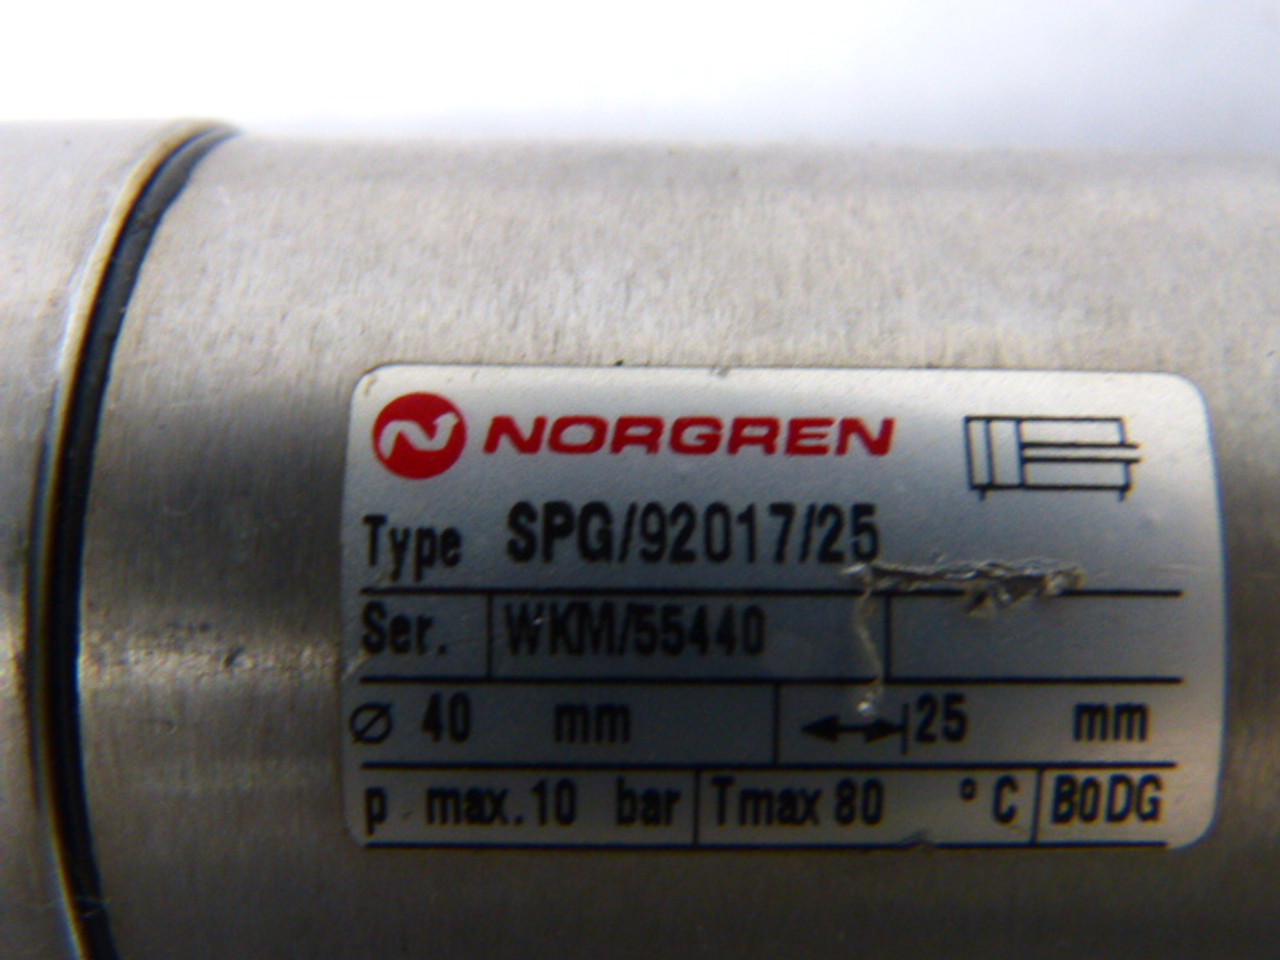 Norgren SPG/92017/25 Air Cylinder USED